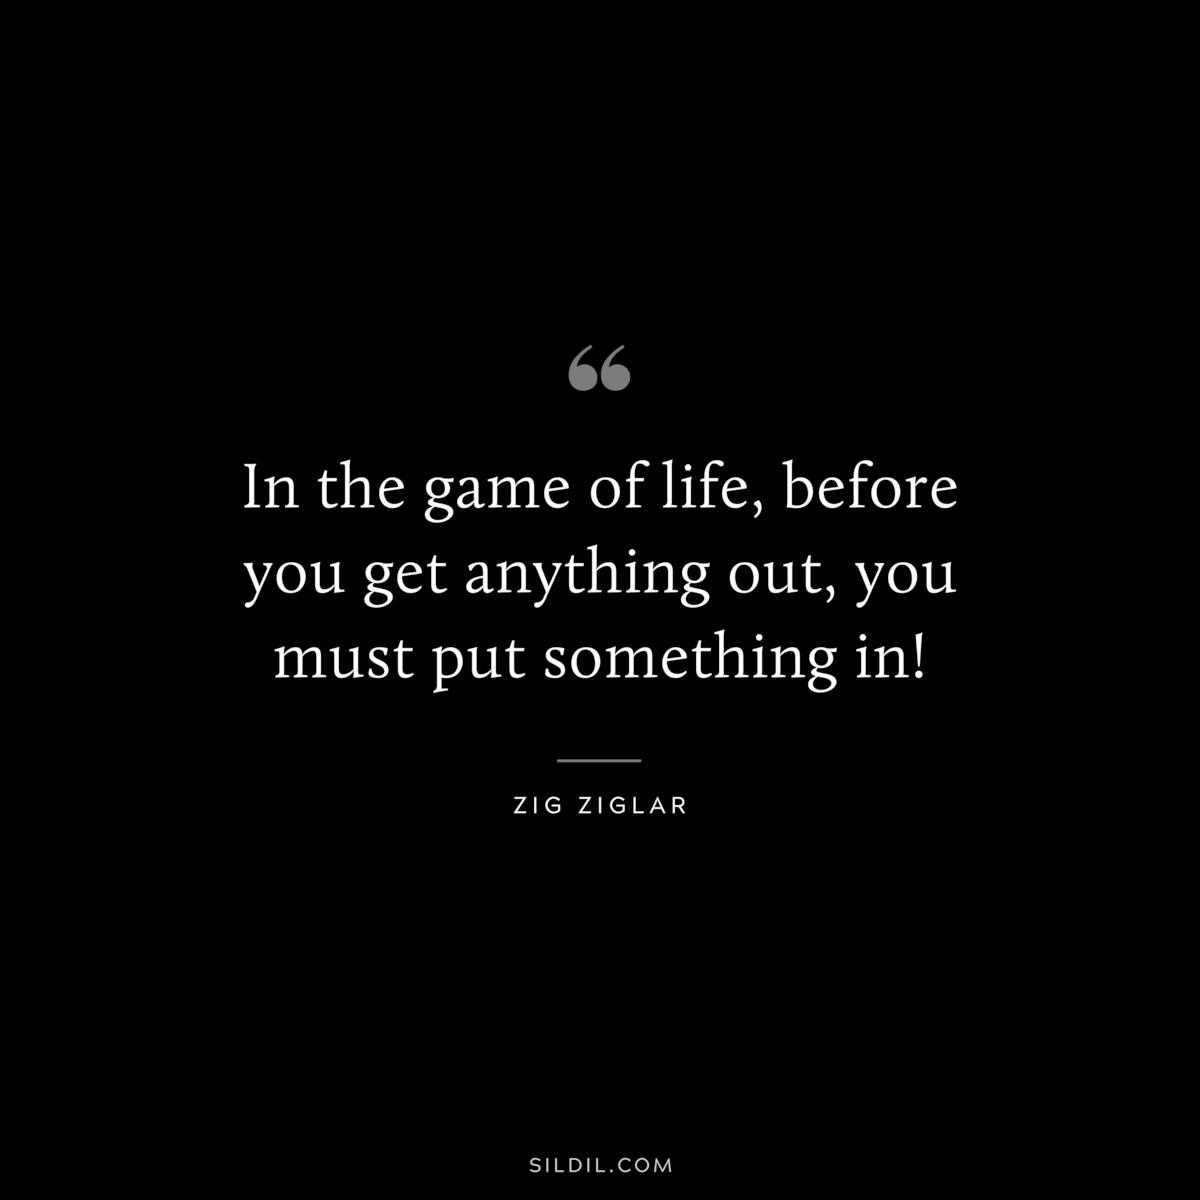 In the game of life, before you get anything out, you must put something in! ― Zig Ziglar